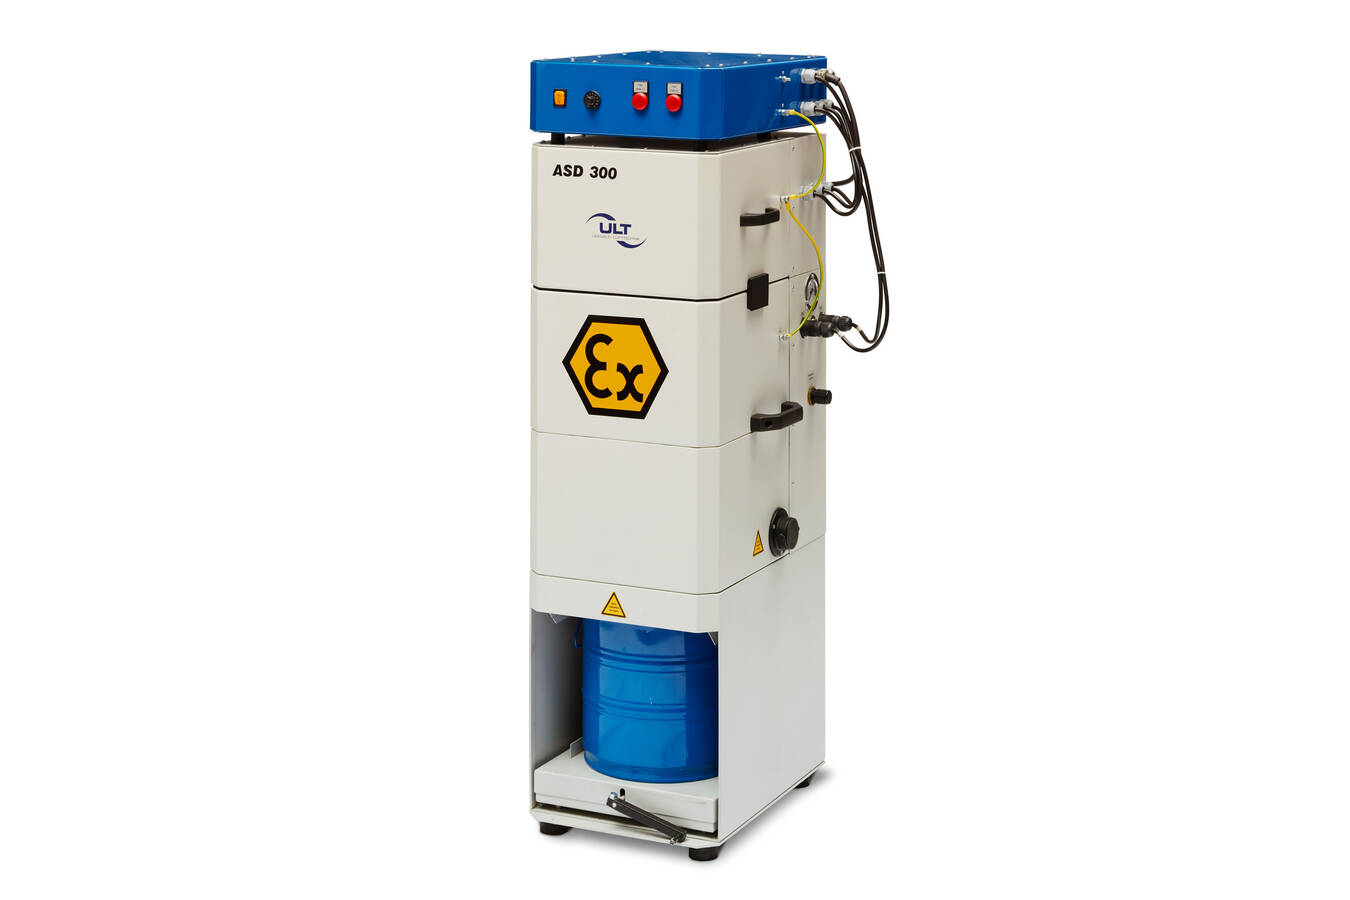 ASD 300 Ex for the removal of explosive dusts